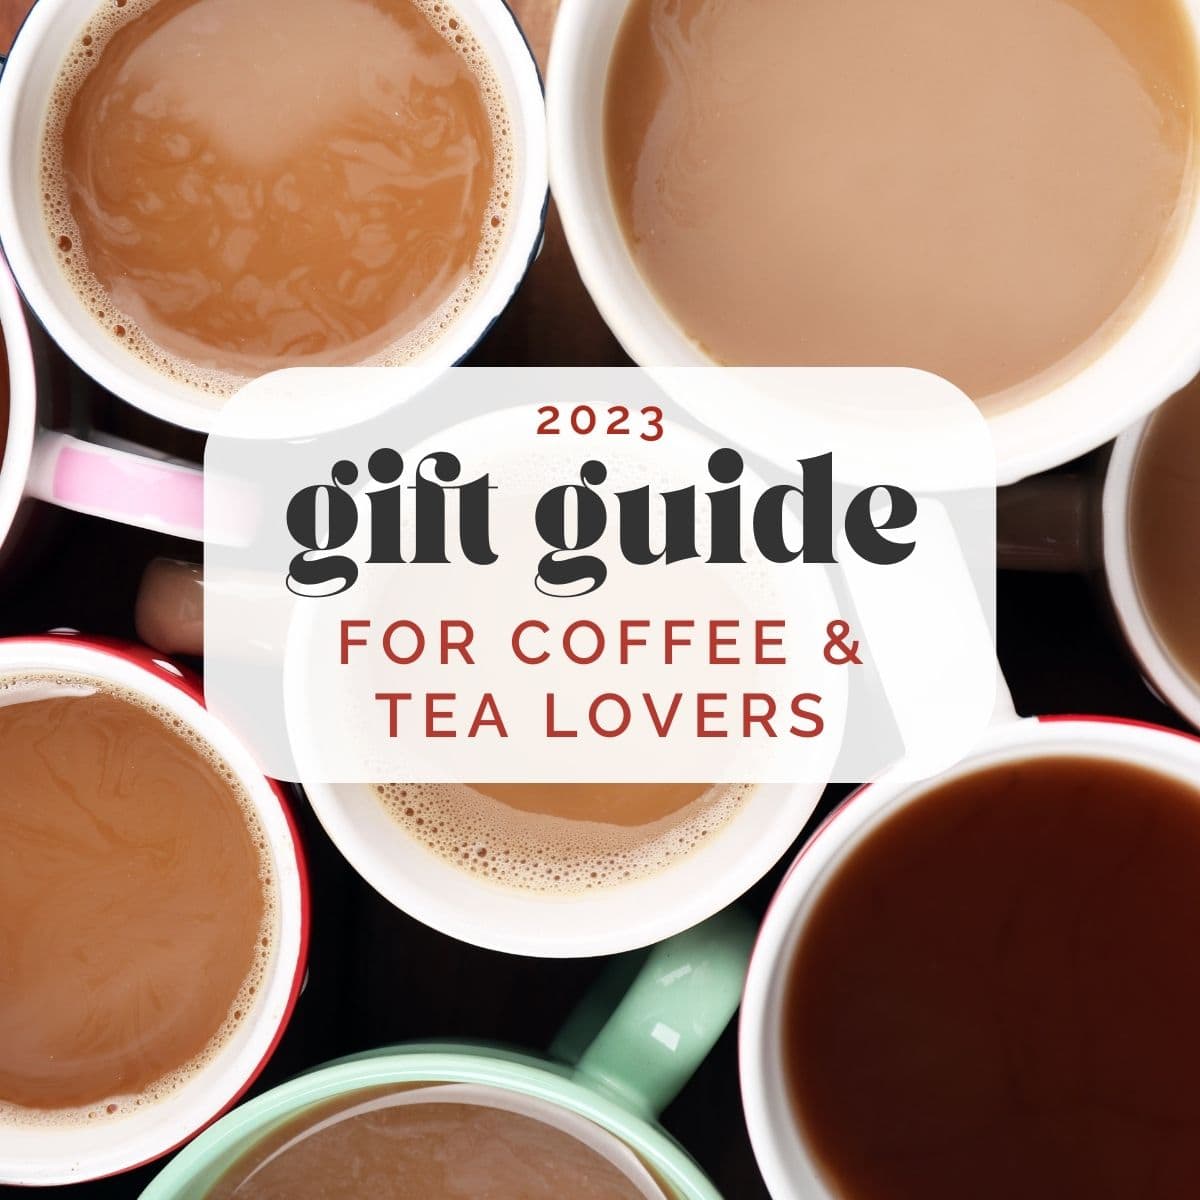 https://oursaltykitchen.com/wp-content/uploads/2023/11/2023-coffee-and-tea-gift-guide-freatured-image.jpg